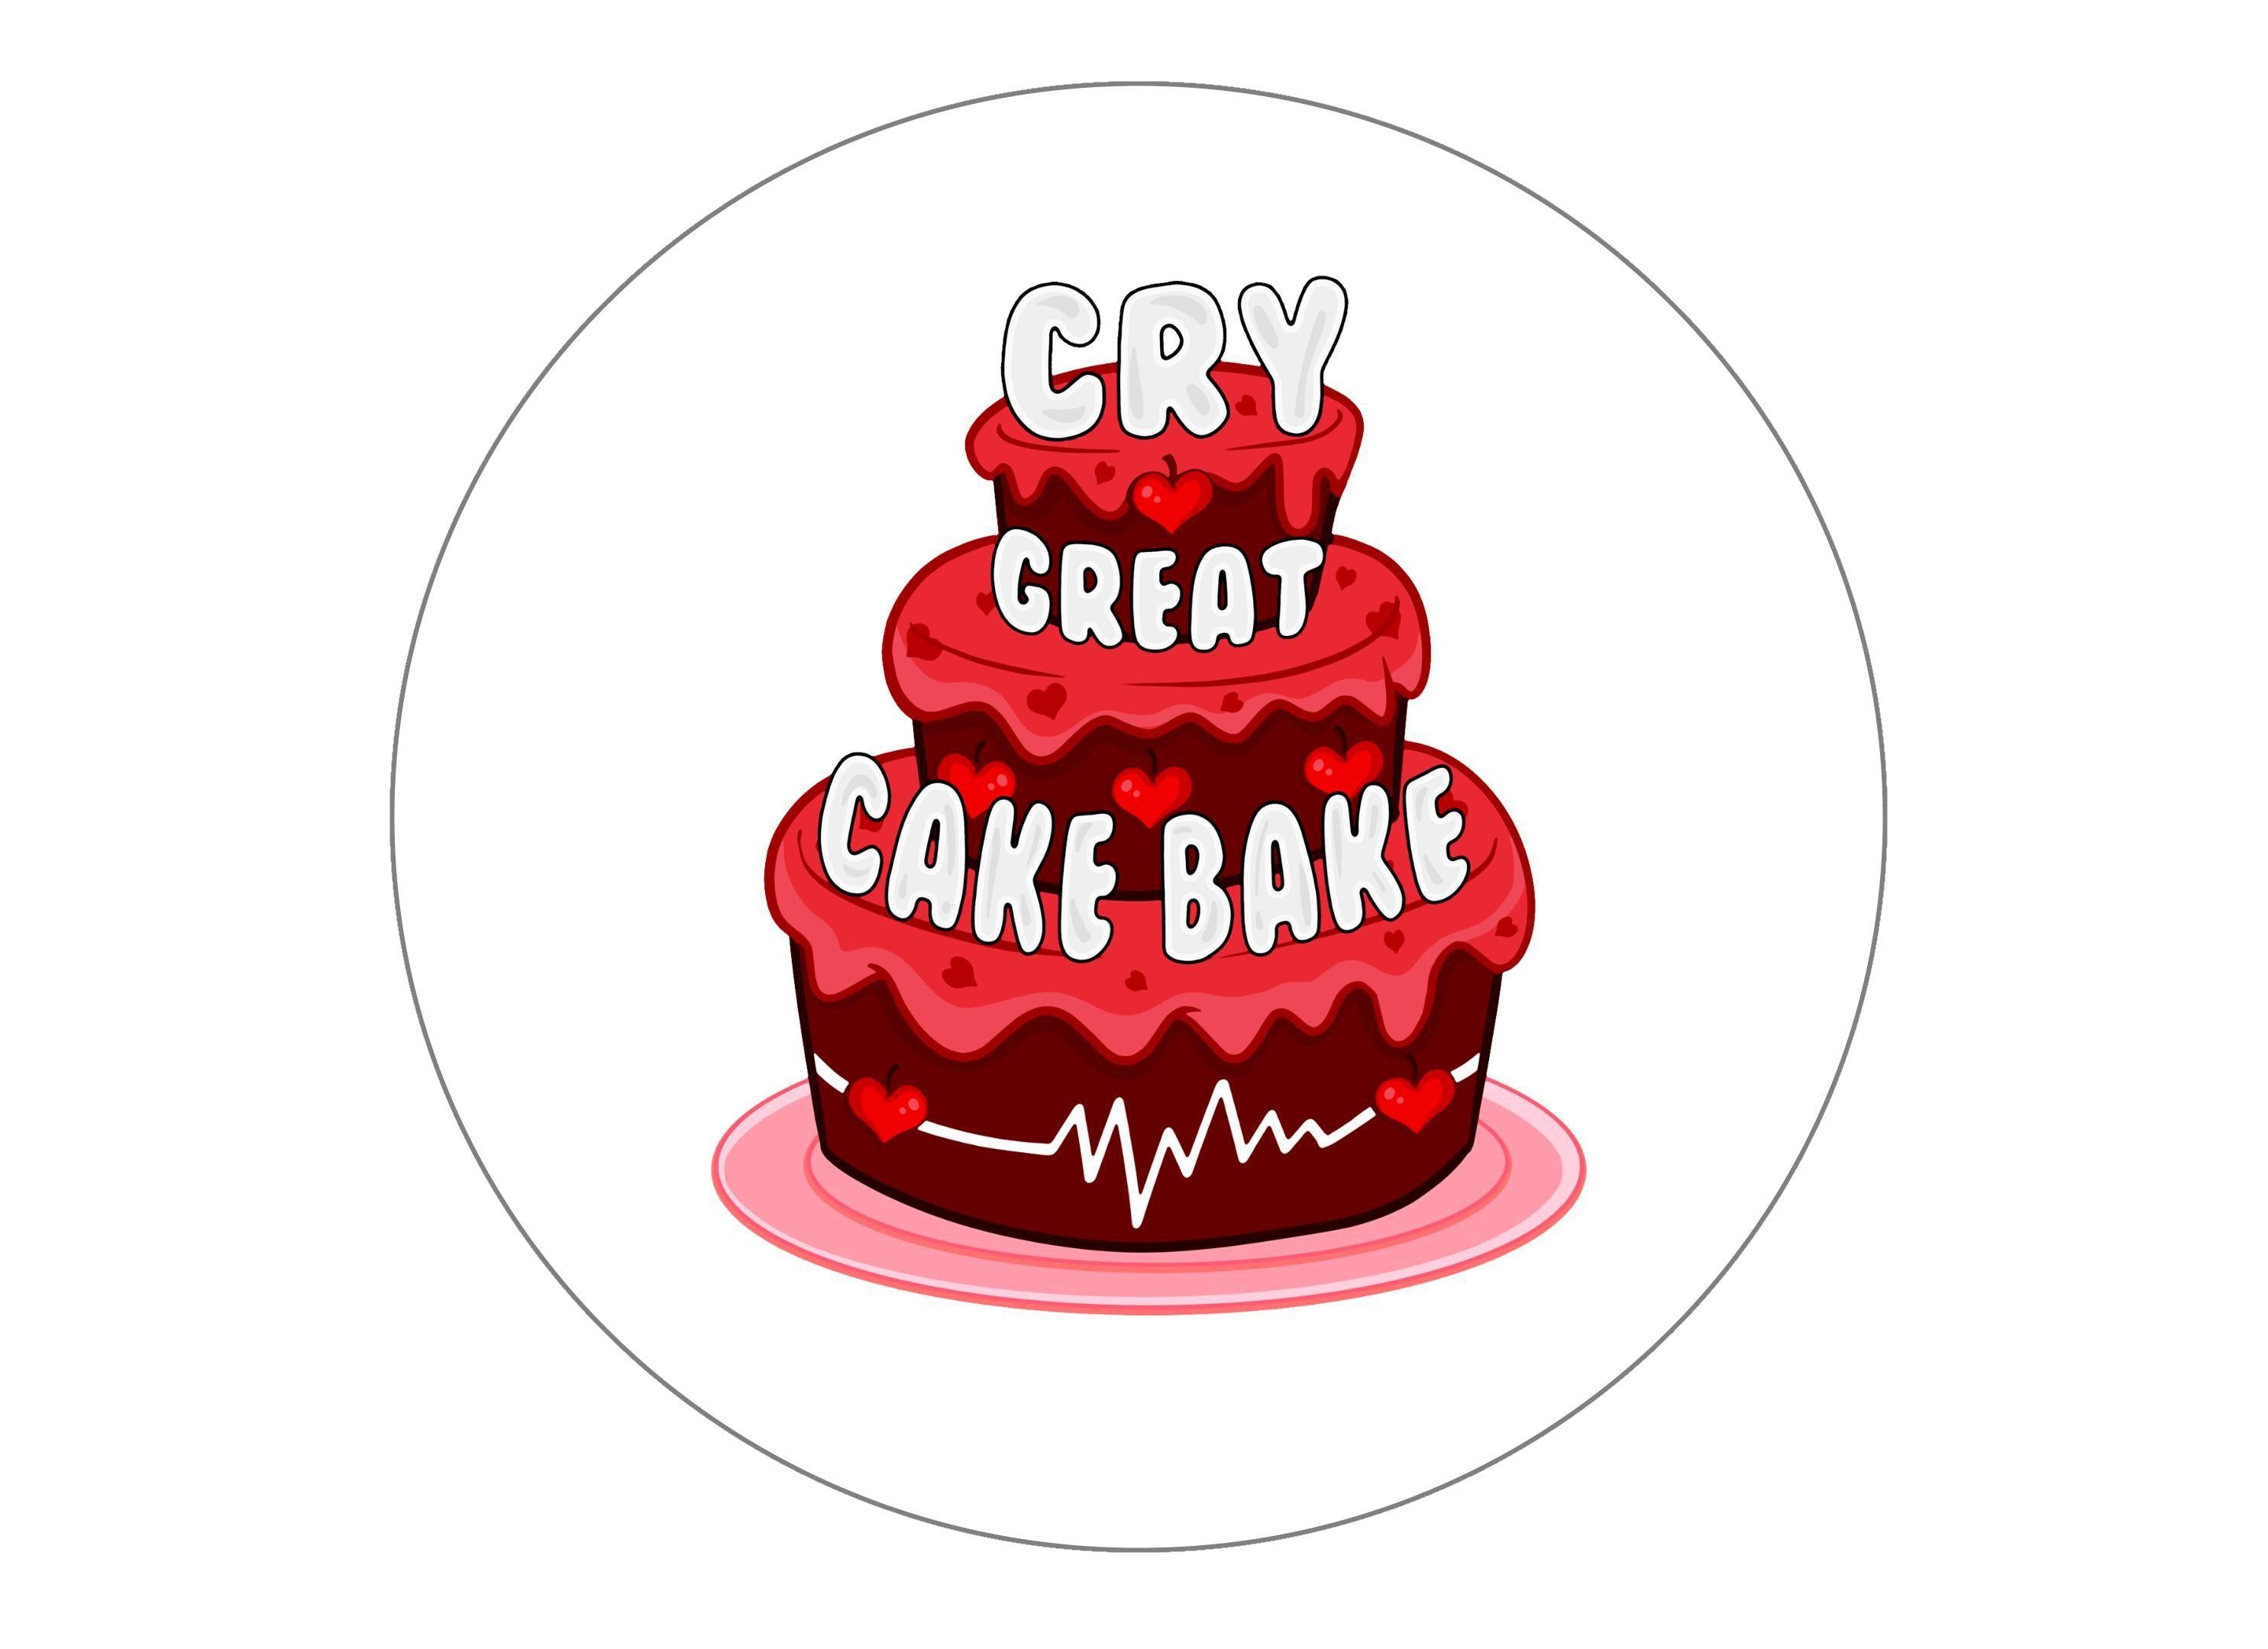 Printed edible cake toppers and cupcake toppers with the Great Cake Bake logo for CRY (Cardiac Risk in the Young)